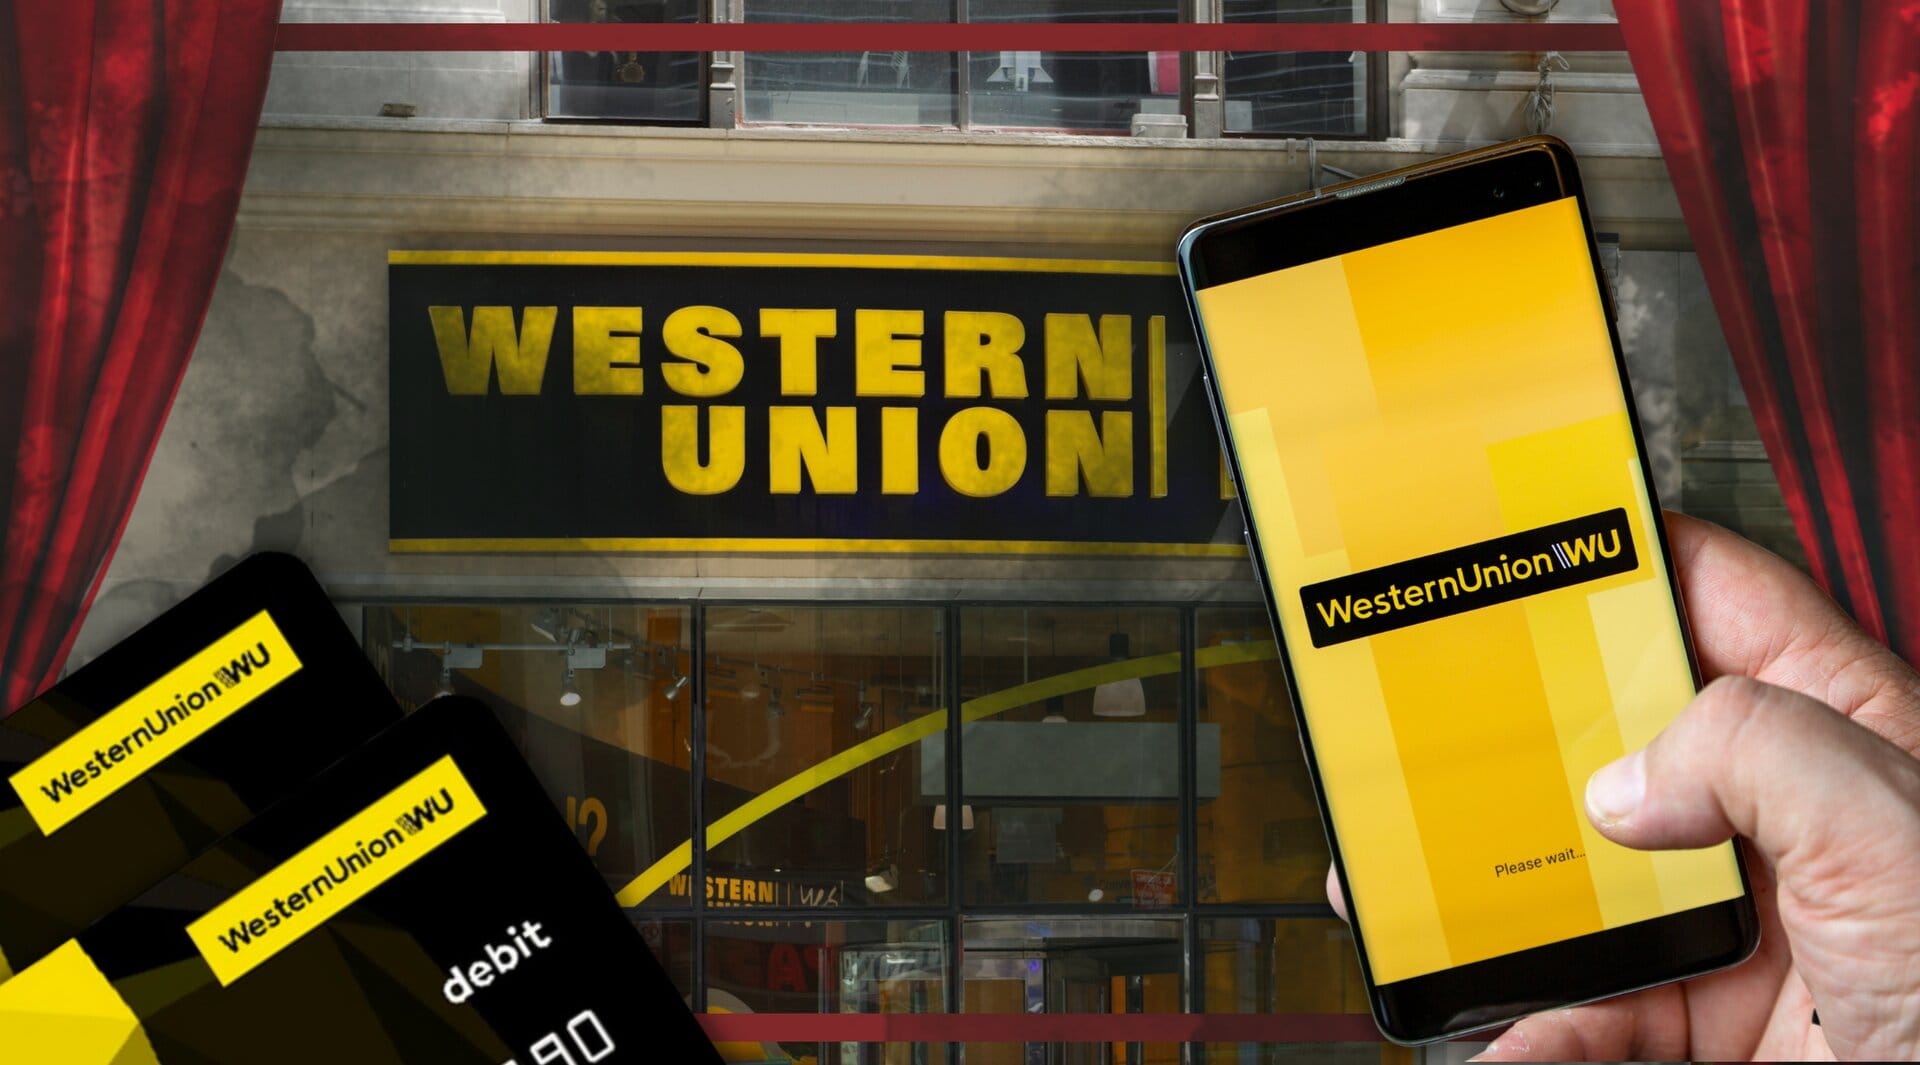 Western Union: Banking & Finance for the Poor 